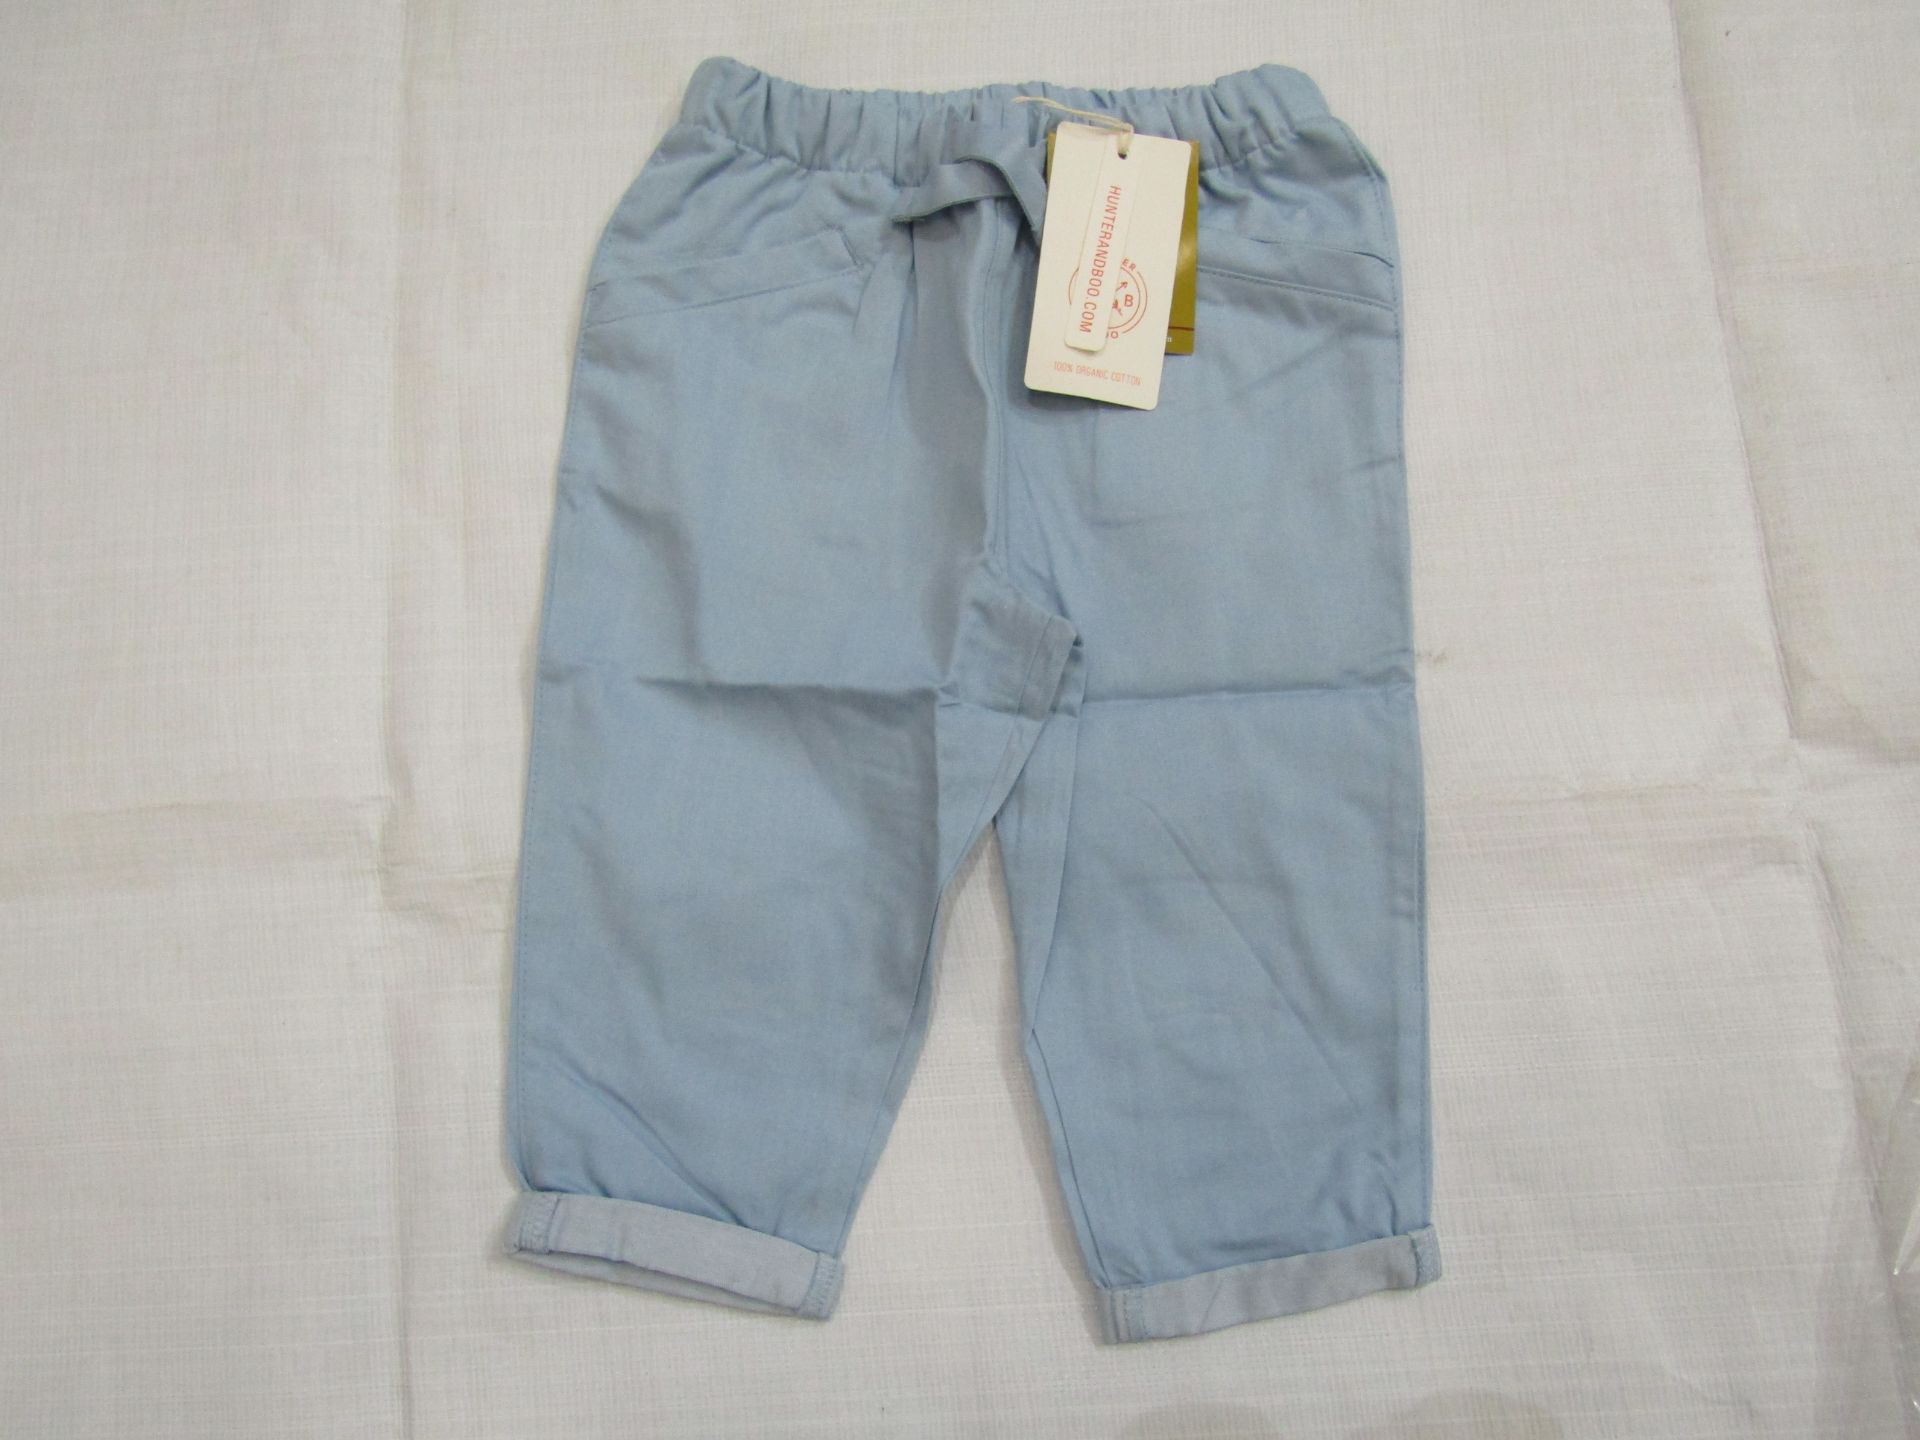 Hunter & Boo Chambray Trouser Blue Aged 18-24 Months New & Packaged RRP £24